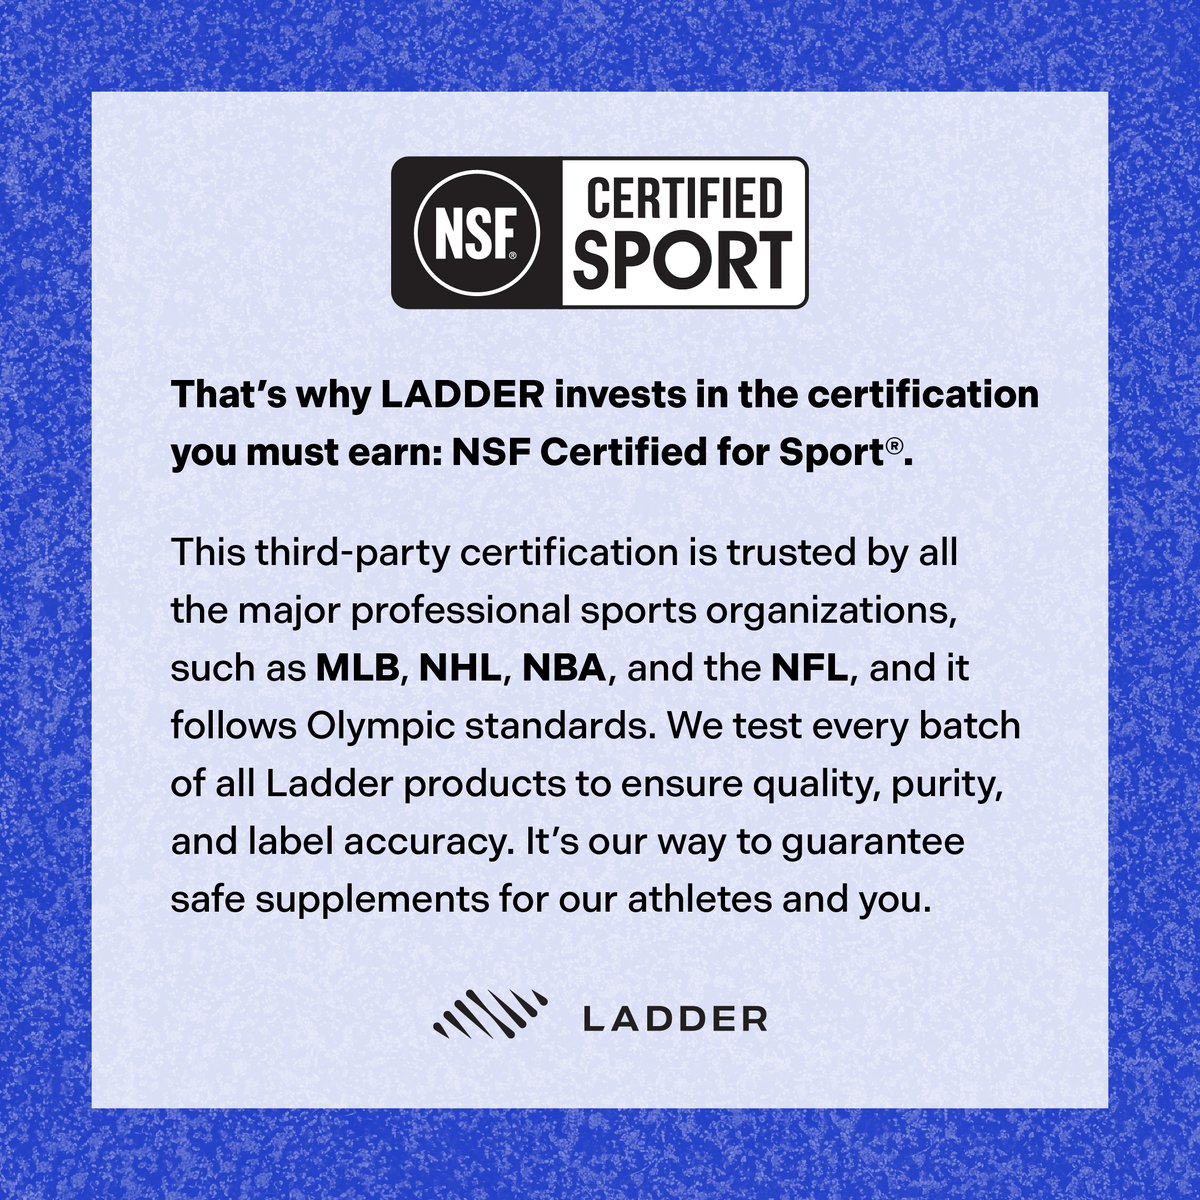 A rung above the rest. Supplements don’t need to be NSF Certified for Sport to be on shelves, but they should for your body. Swipe to read more.